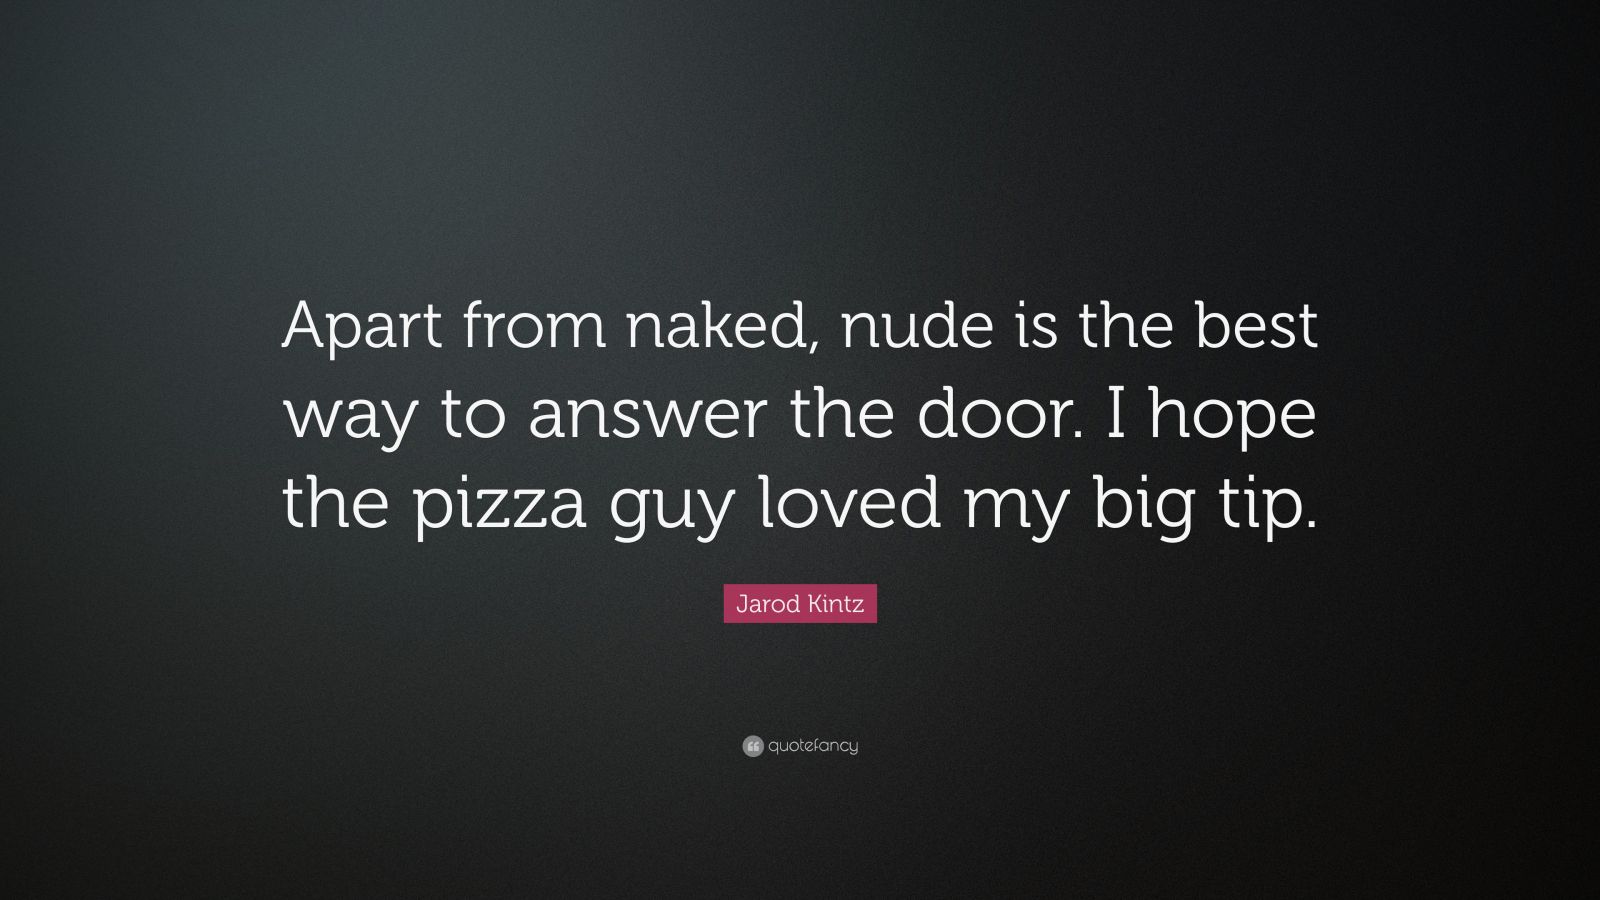 Jarod Kintz Quote “Apart from naked, nude is the best way to answer the door image